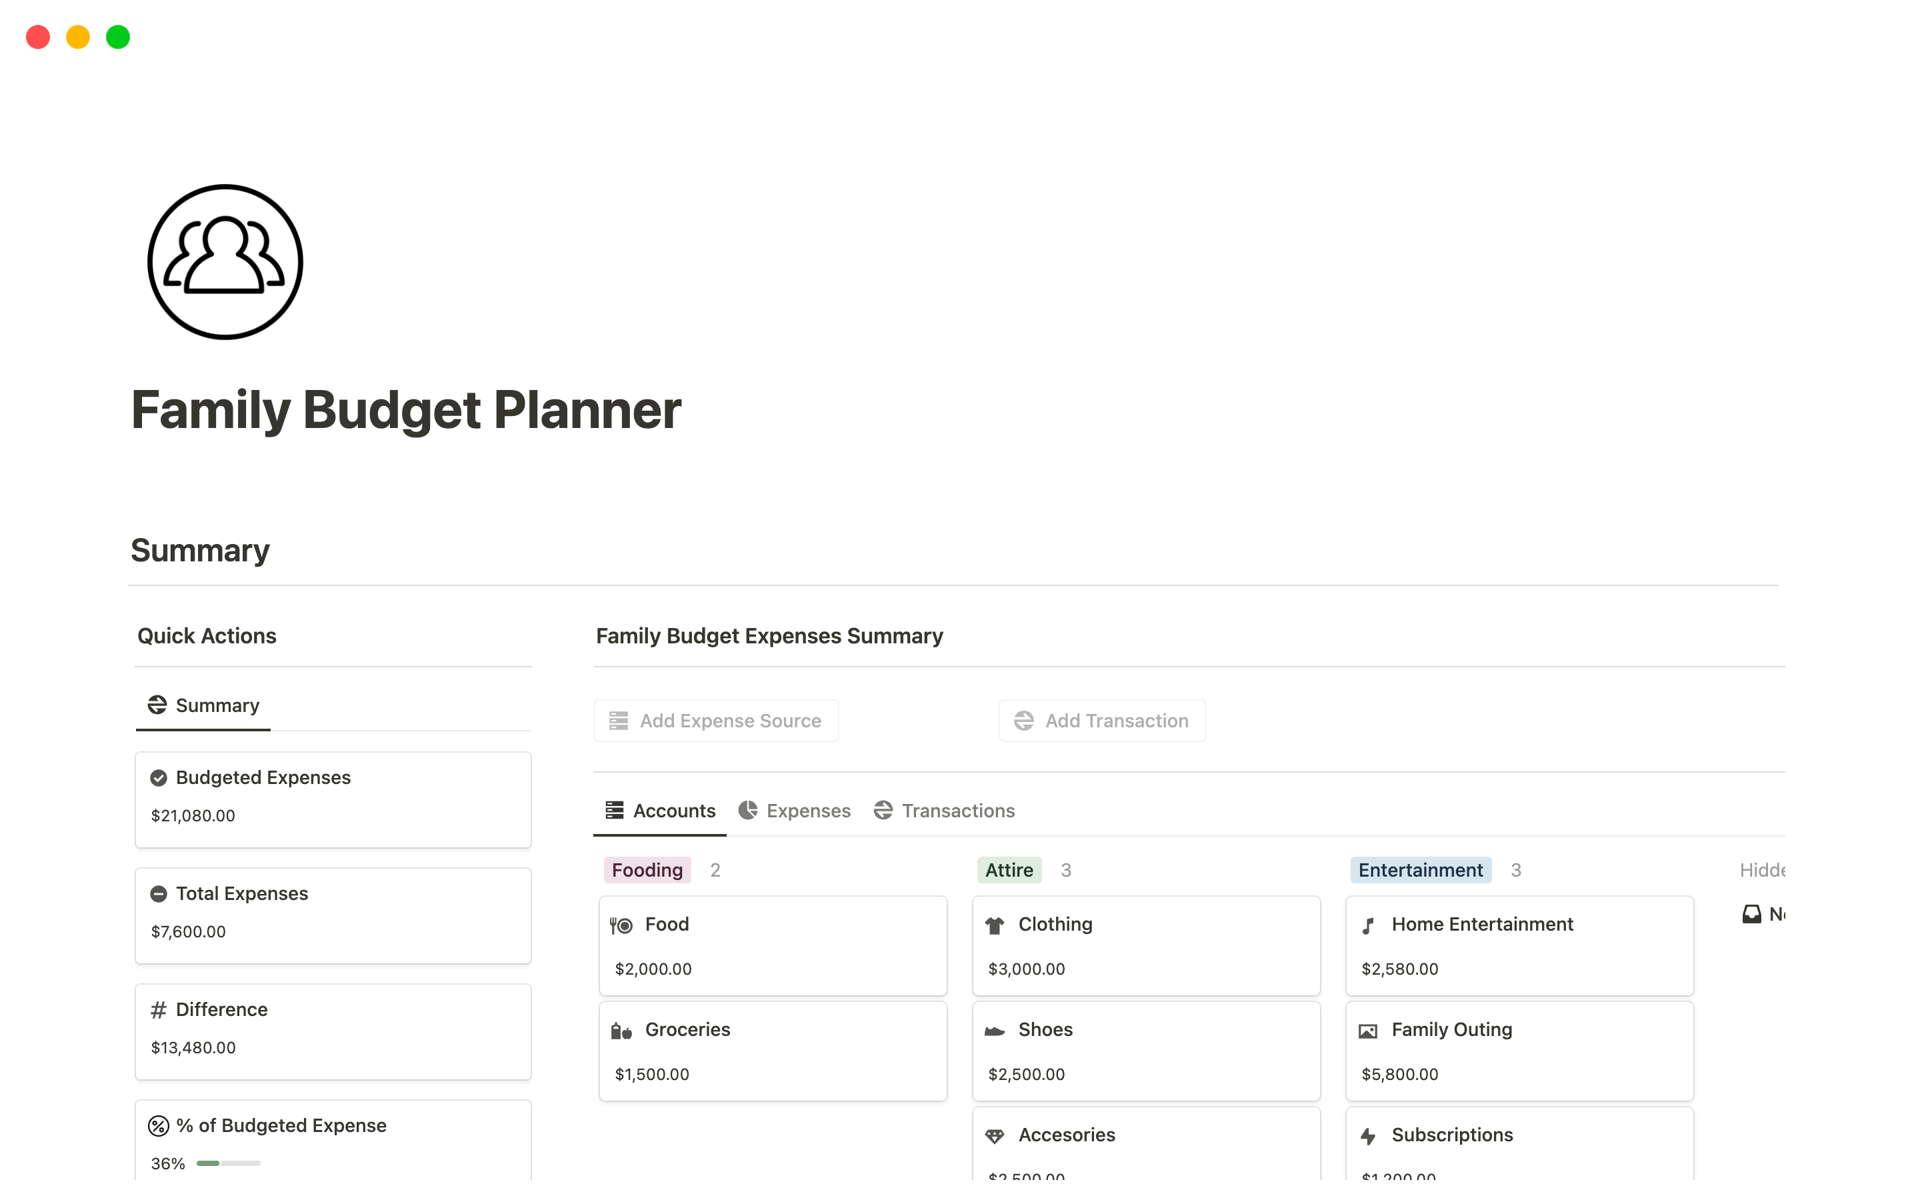 A Family Budget Planner template is used to track and manage household income and expenses, helping families maintain financial stability and achieve their financial goals.